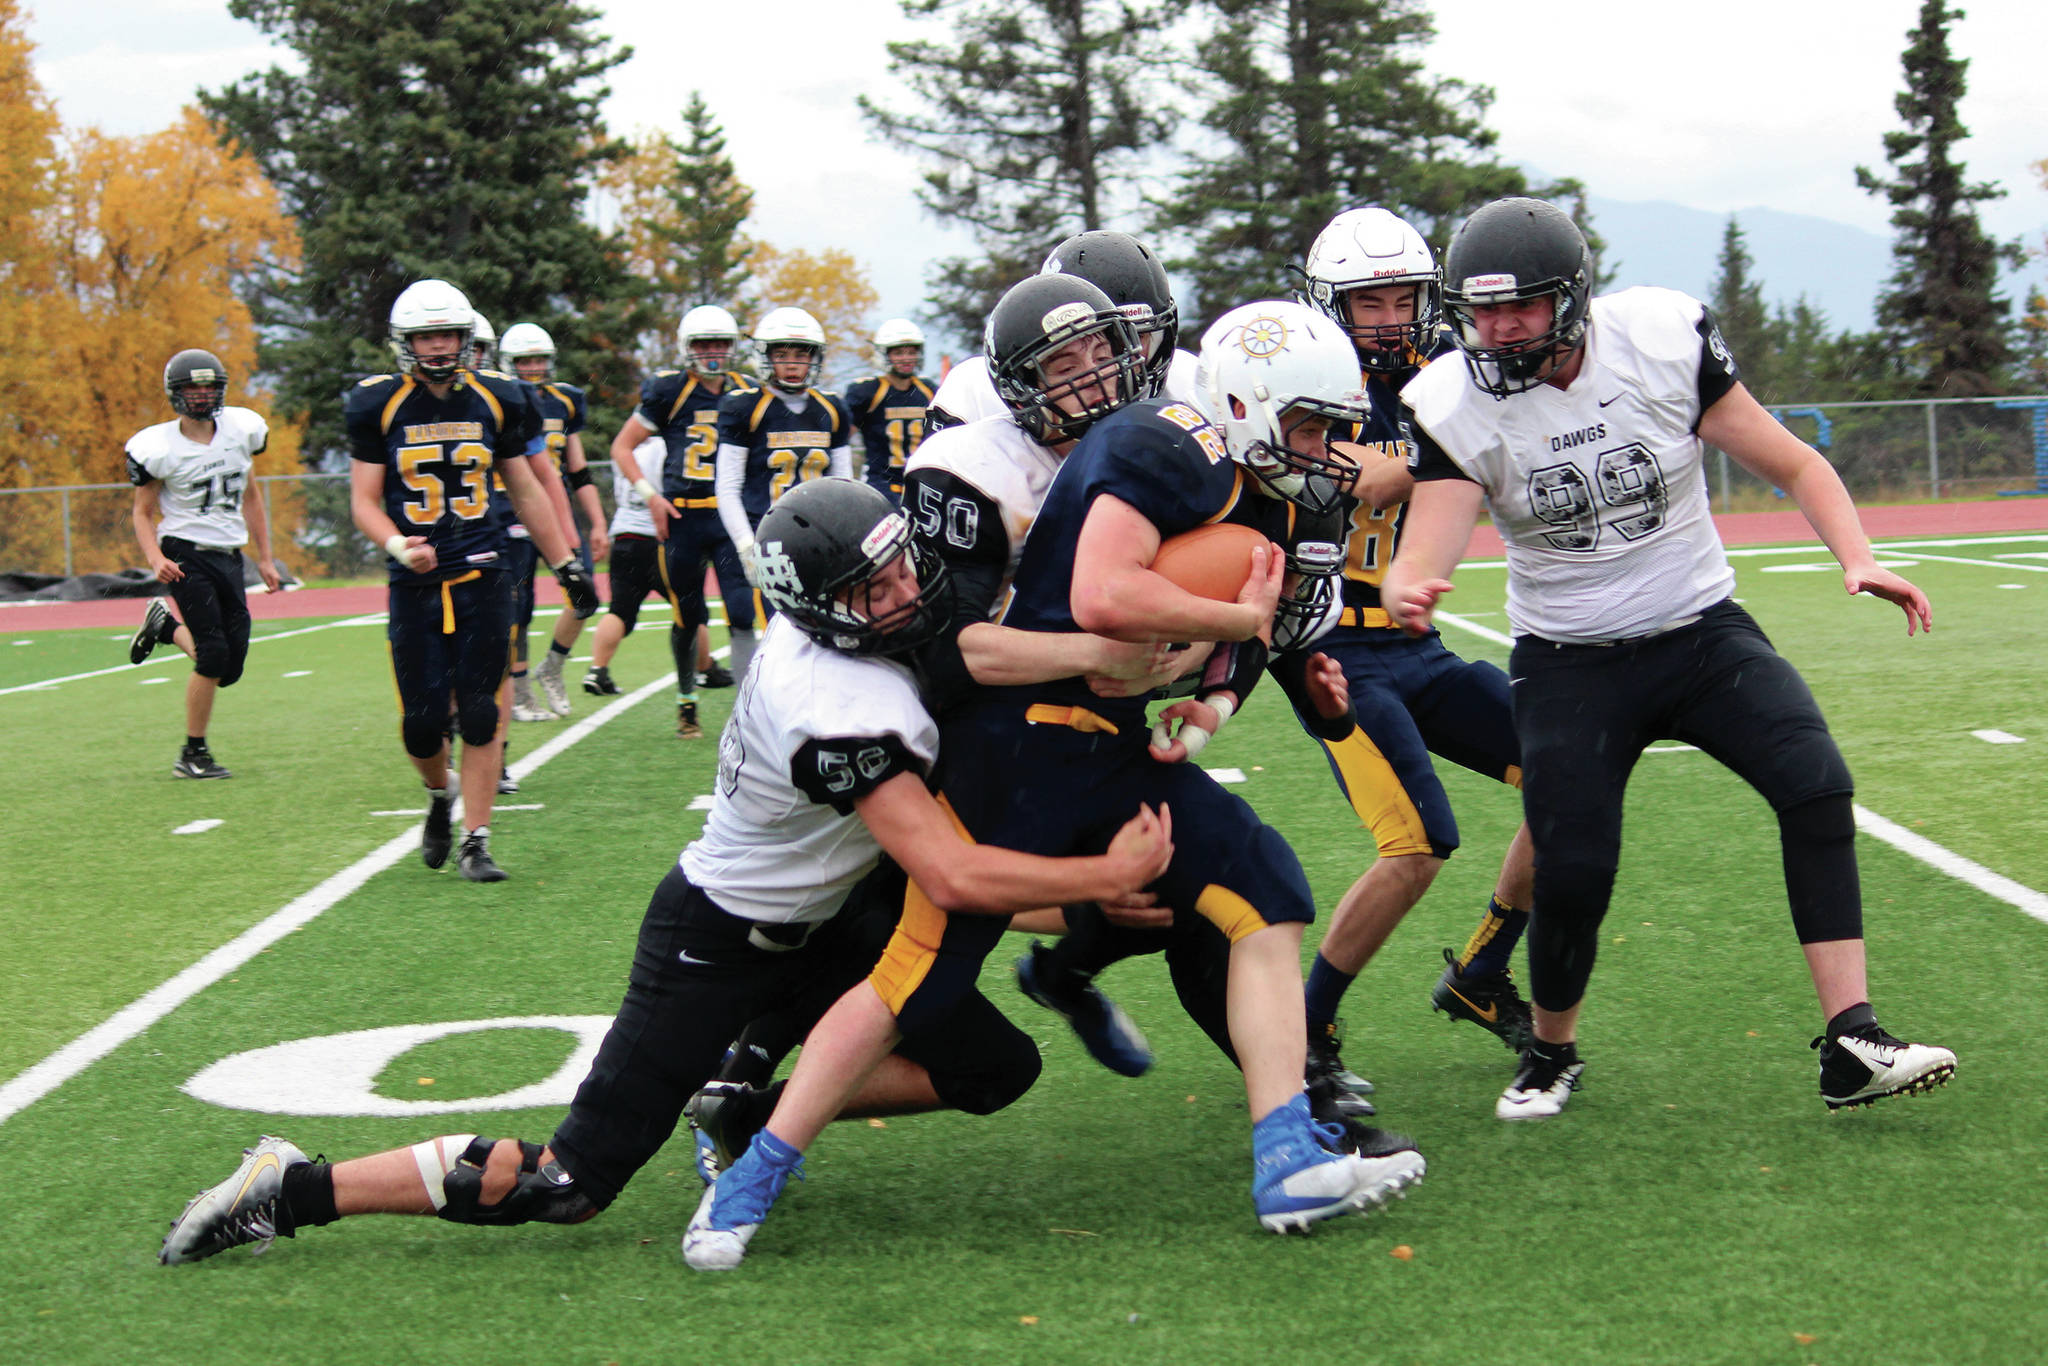 Photo by Megan Pacer/Homer News                                 Homer’s Antonin Maruchev powers through a group of Nikiski defenders during a Saturday, Sept. 28 football game at Homer High School in Homer.